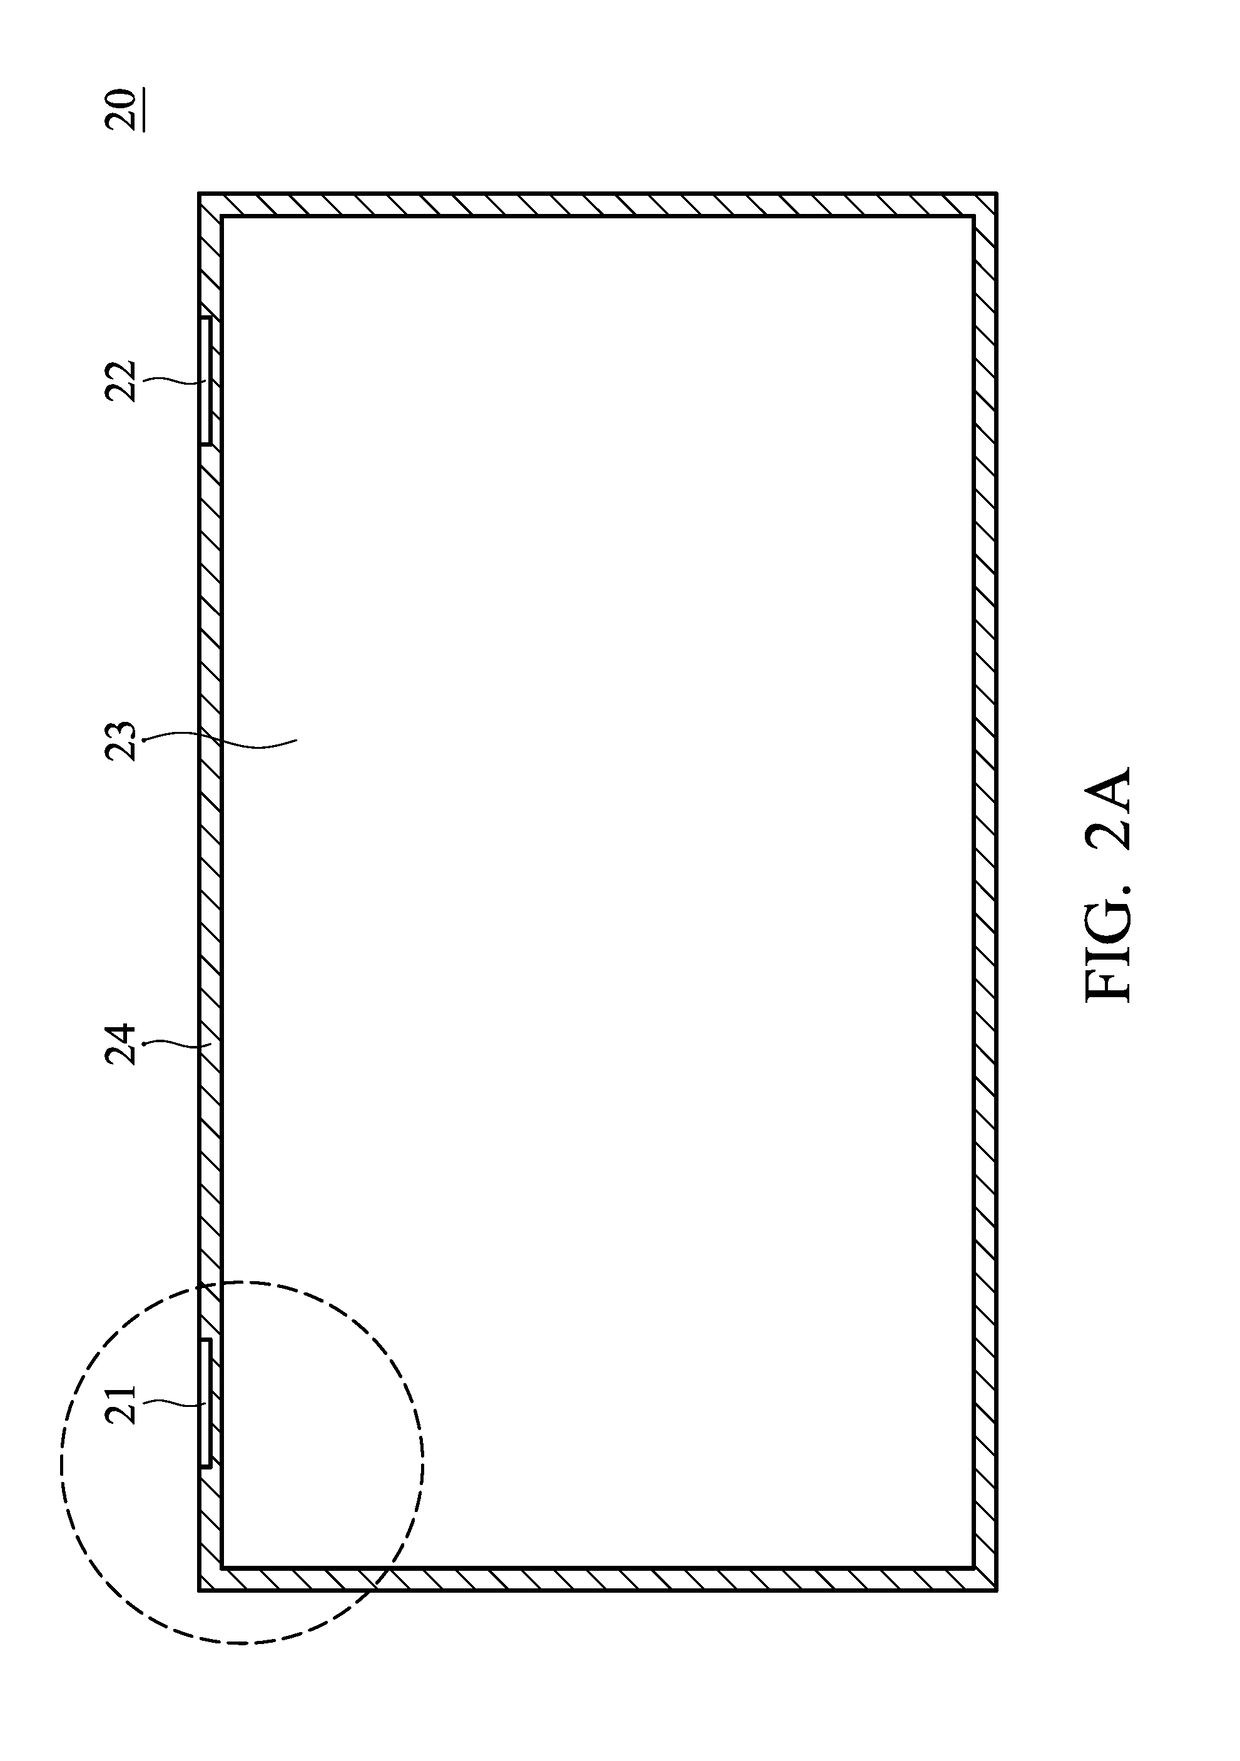 Dual-band antenna structure